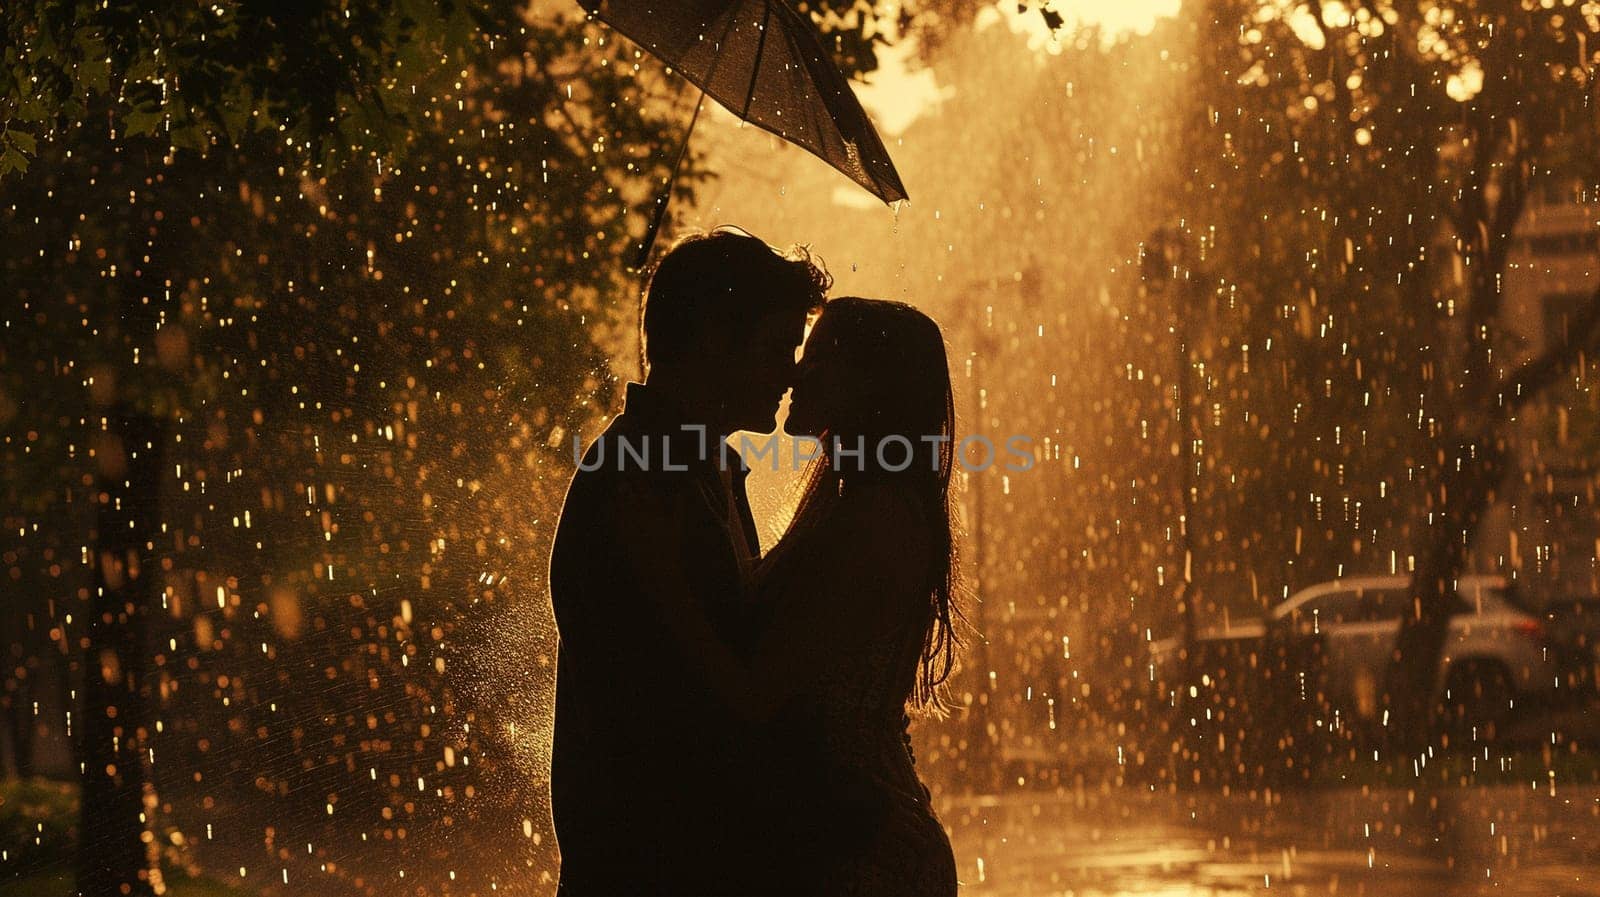 A couple in love under the same umbrella. Romantic photo for Valentine's Day by NeuroSky